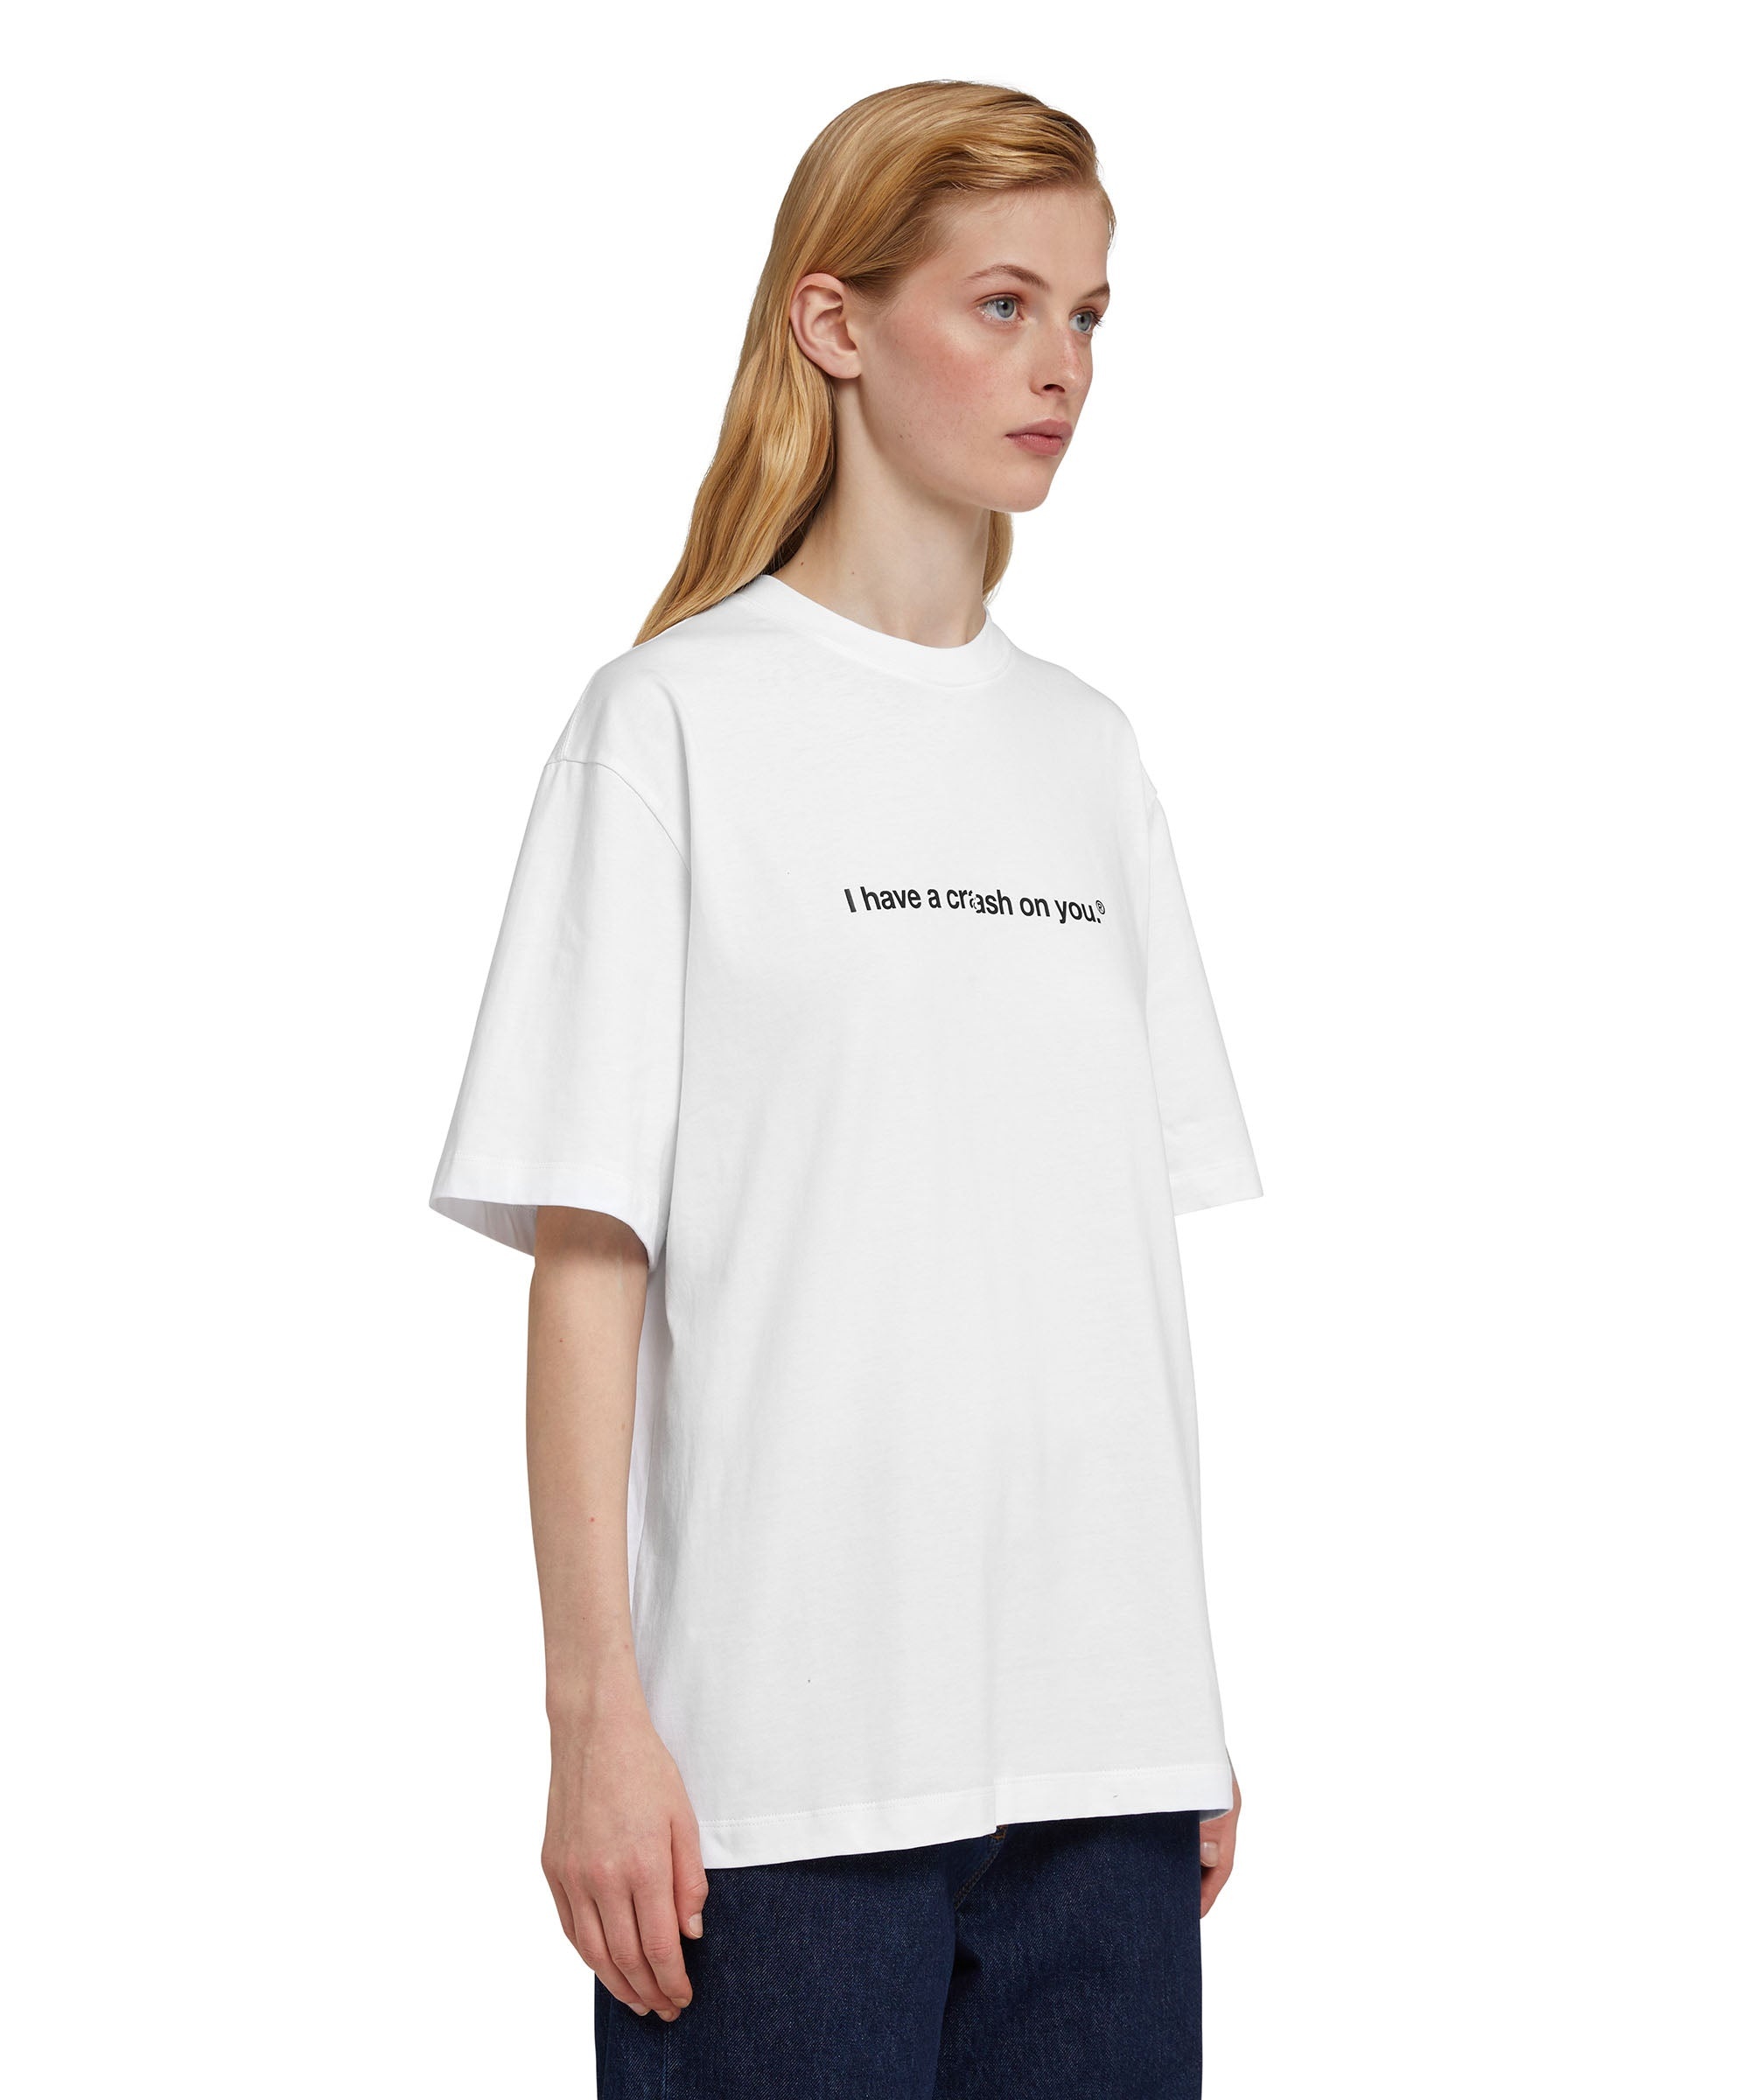 Cotton T-shirt with Crash quote - 8